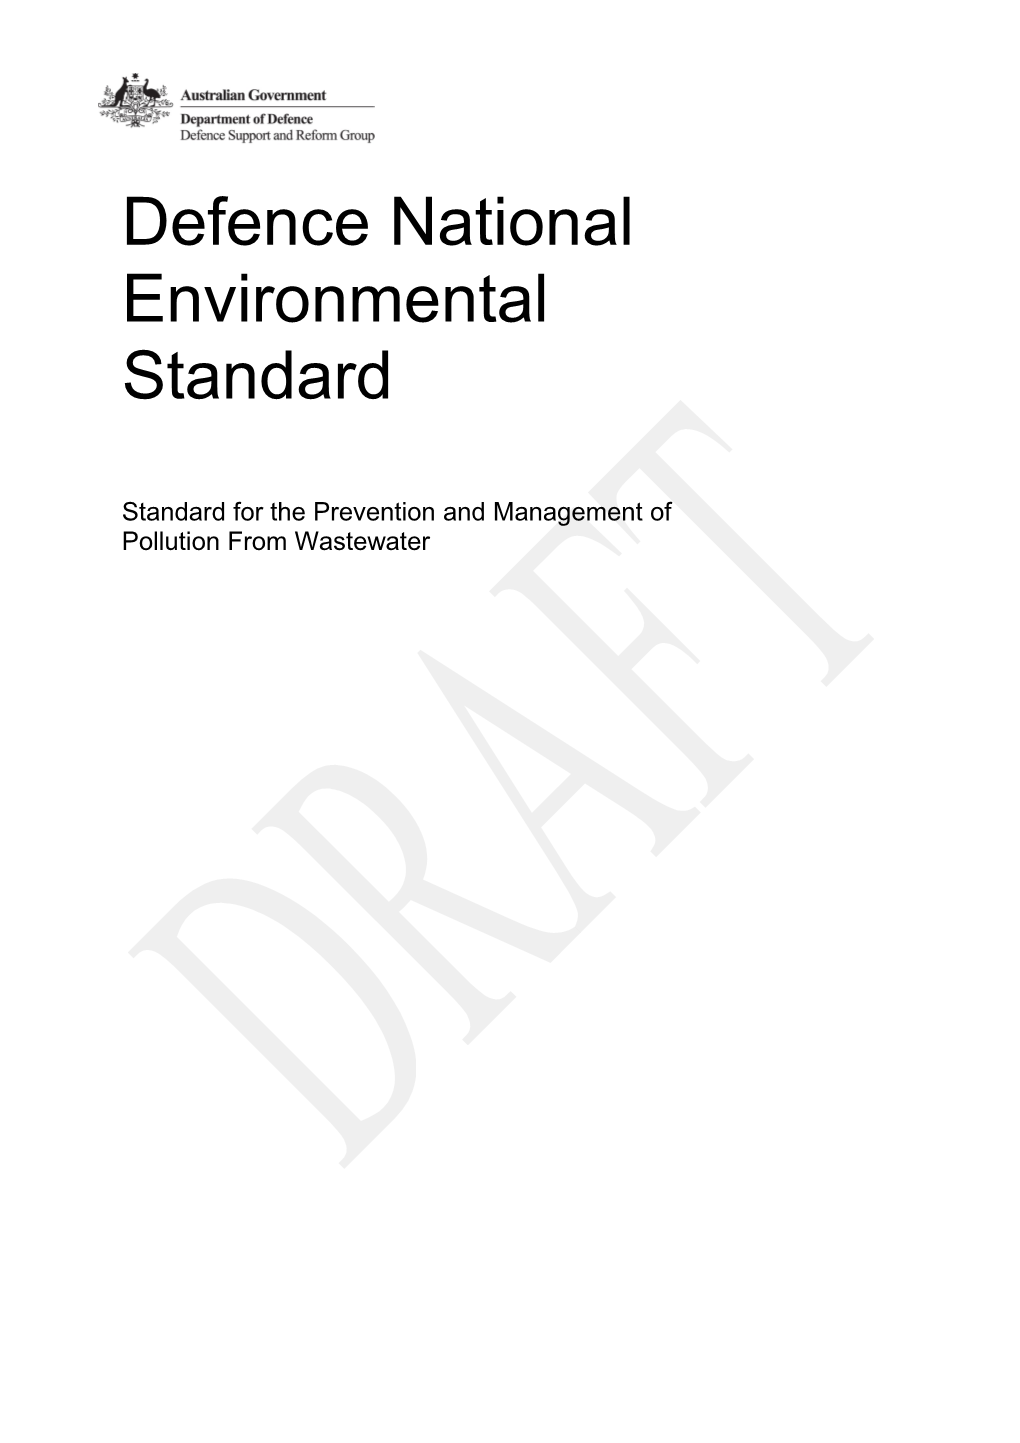 Attachment 2: Draft Defence National Environmental Standard Template